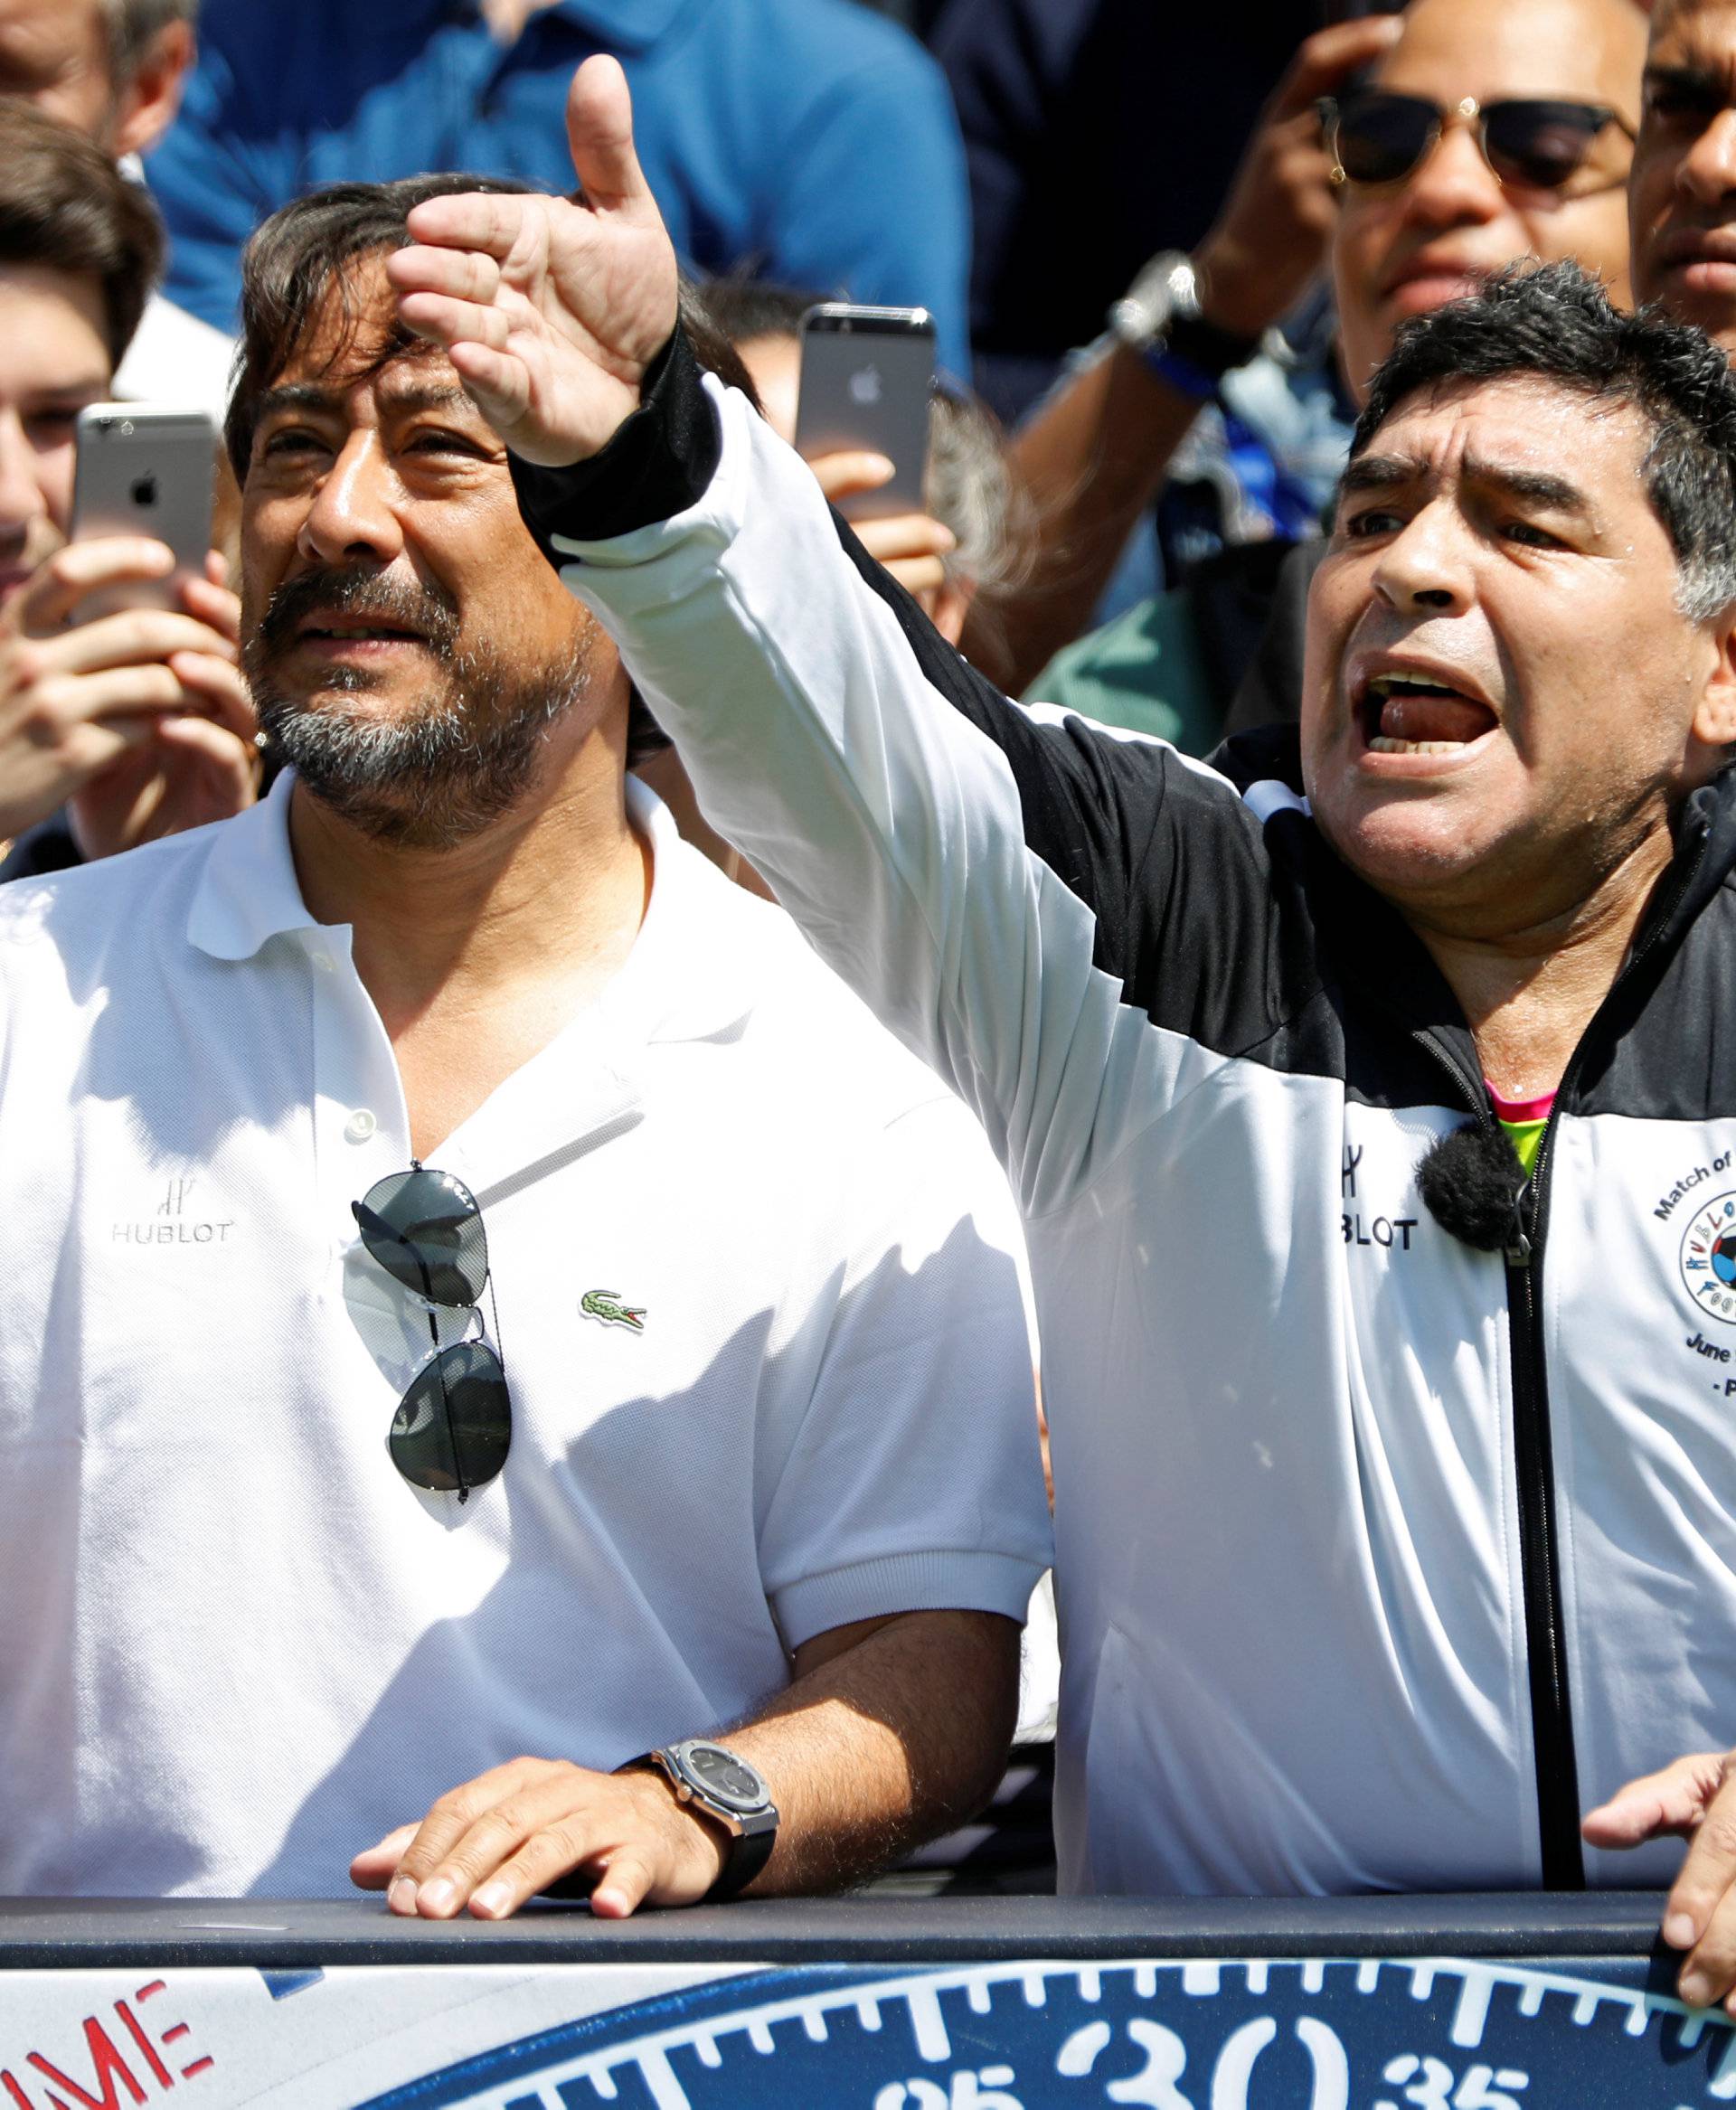 Football legend Diego Maradona reacts during an advertising event on the eve of the opening of the UEFA 2016 European Championship in Paris